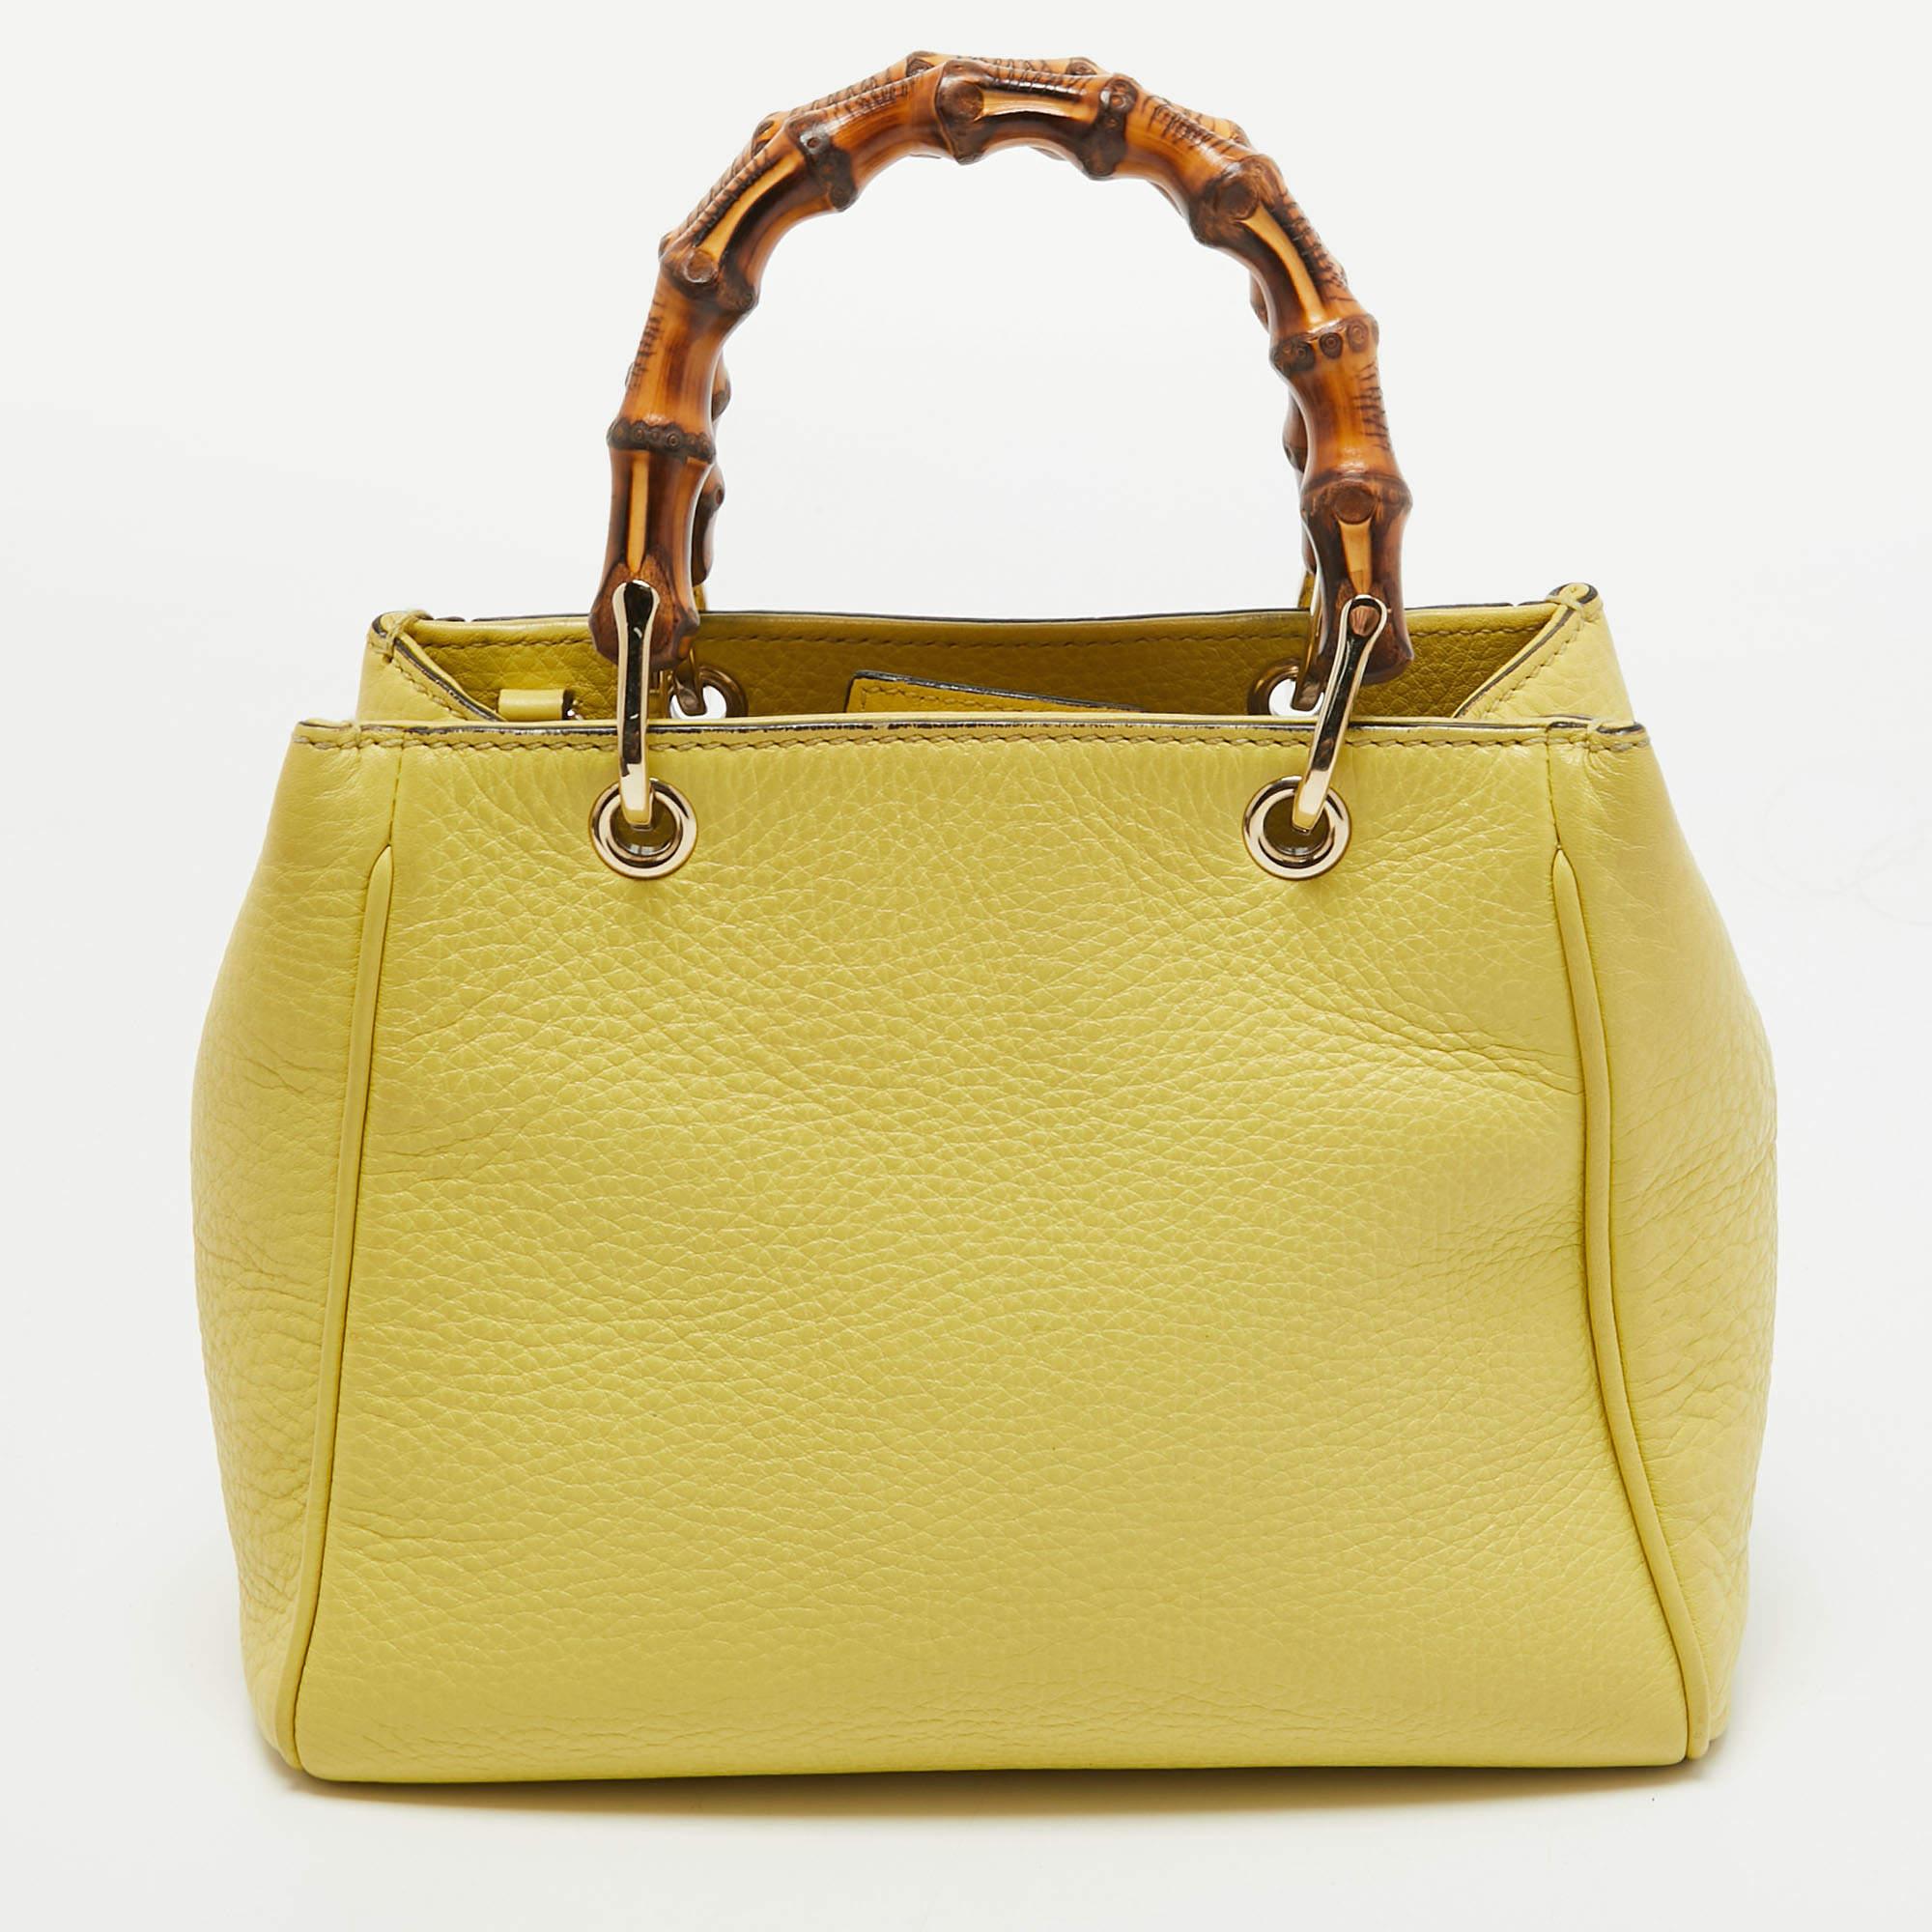 Handbags as fabulous as this one are hard to come by. So, own this gorgeous tote from Gucci today and light up your closet! Crafted from yellow leather, this tote has a spacious interior and is wonderfully held by two Bamboo handles, making the